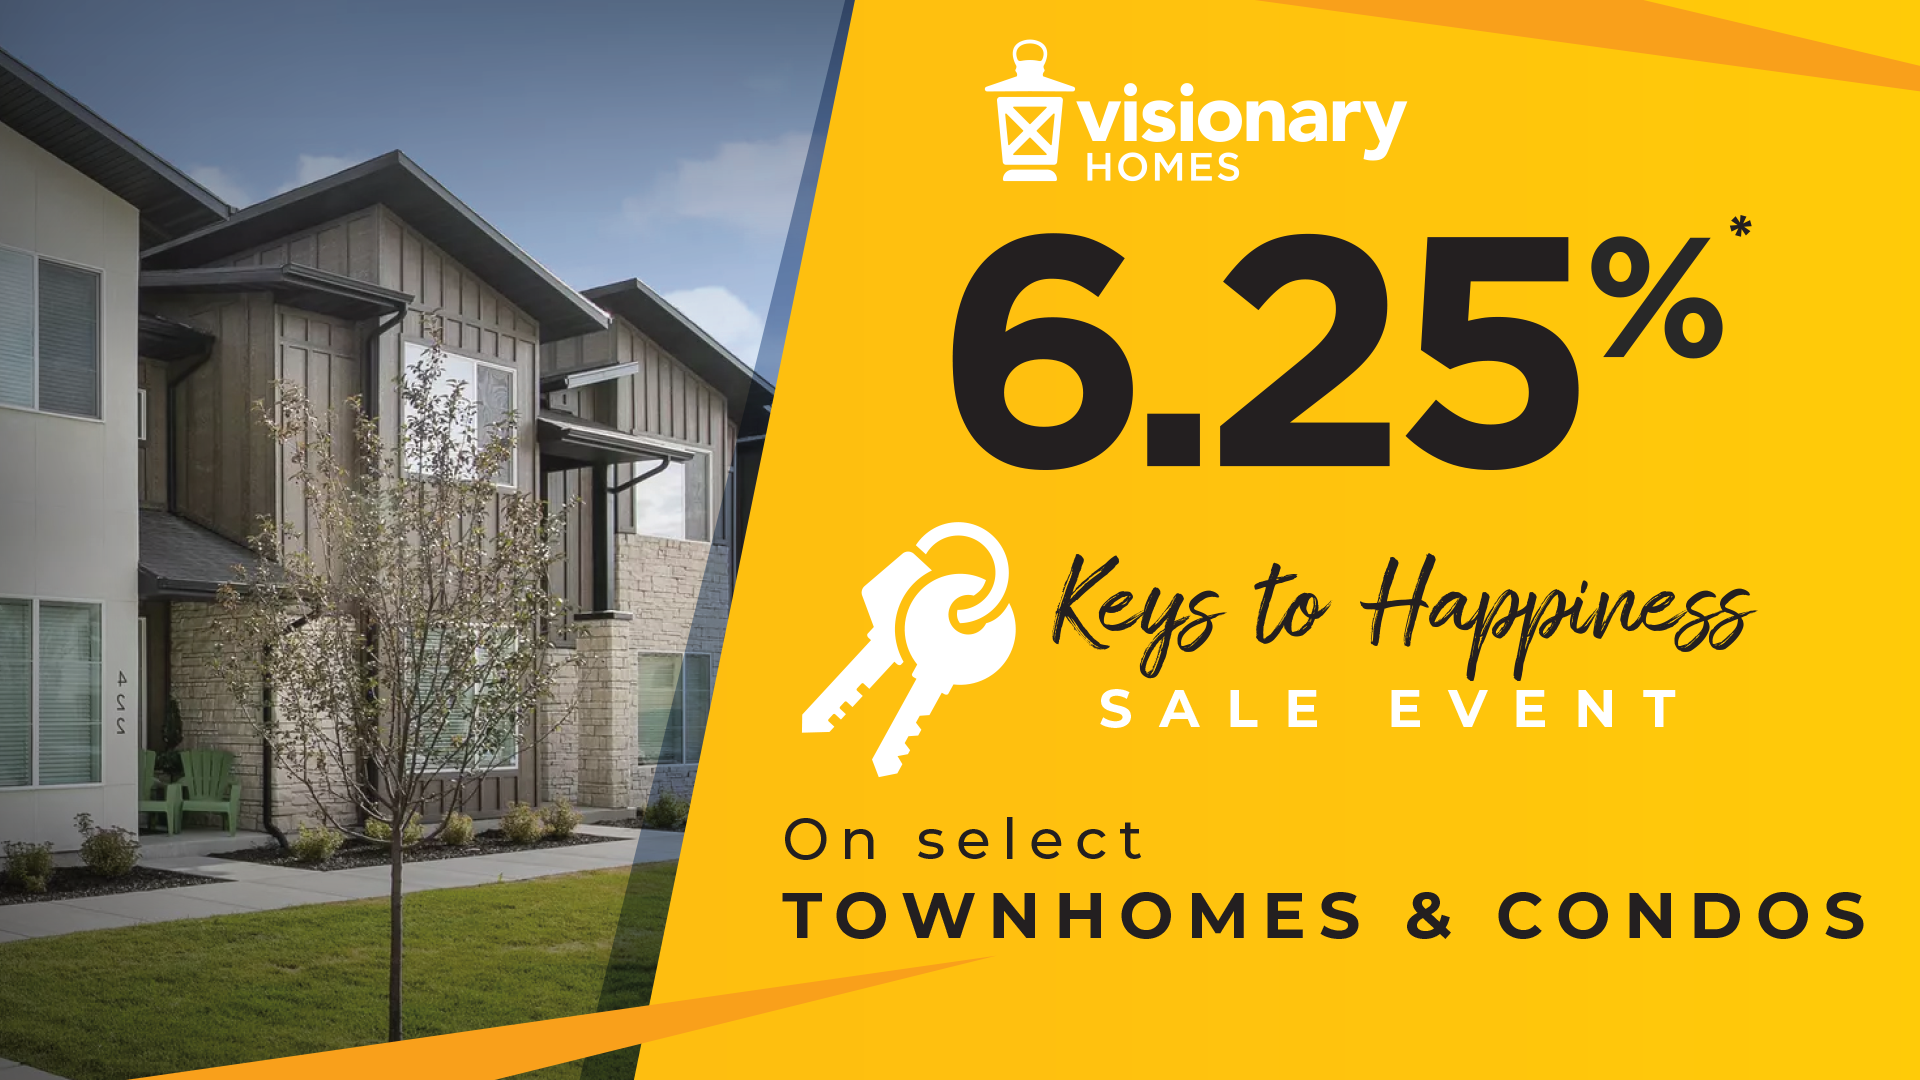 Visionary Homes in Utah Rates as low as 6.25% on Quick Move-In Homes!